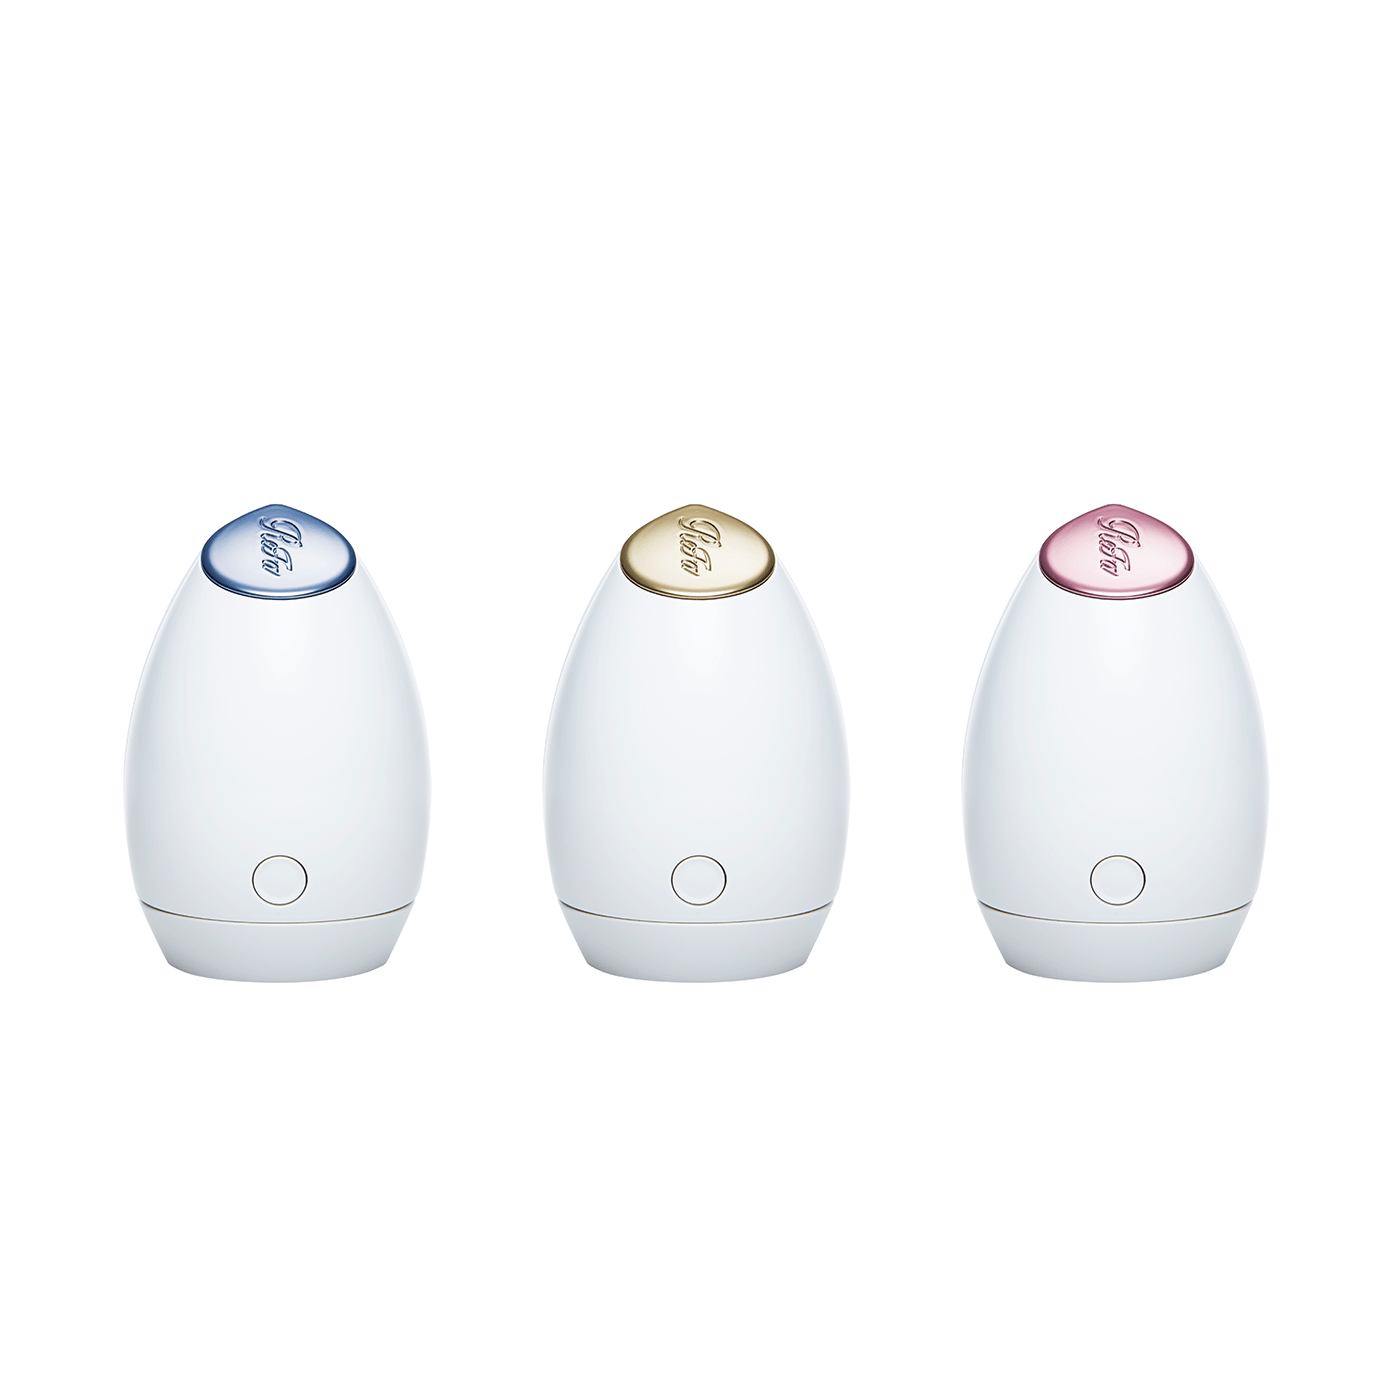 Make a difference in your skin's future with blue, yellow, and red light therapy. ReFa BEAUTECH SPOT, a handheld facial beauty machine that takes only 5 minutes per use, launching on Friday, April 1